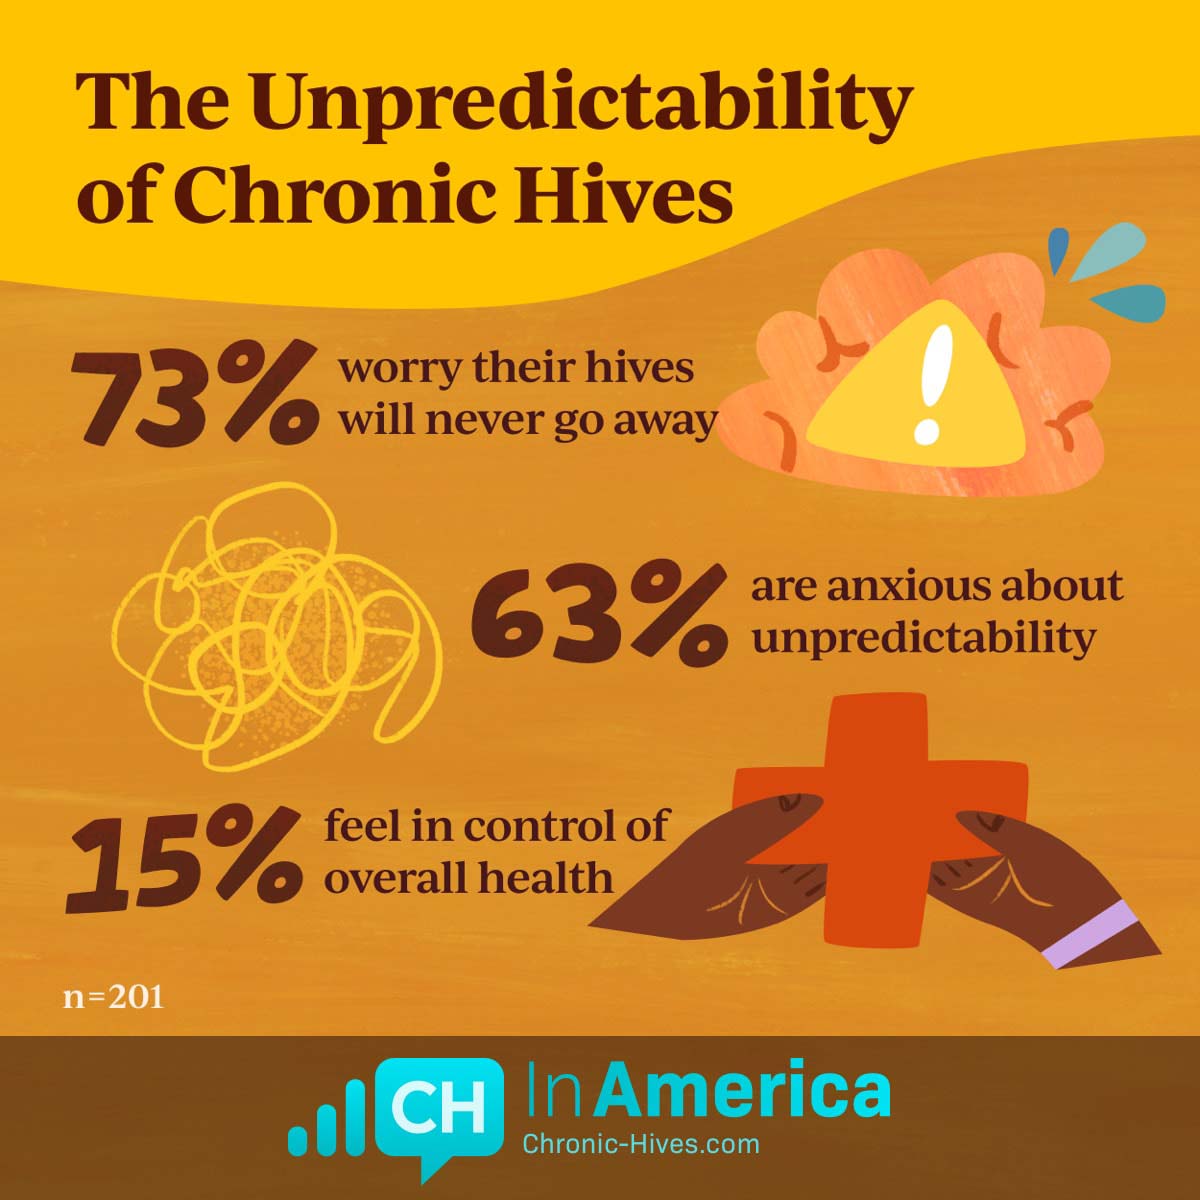 73% worry their hives will never go away. 63% are anxious about unpredictability, and 15% feel in control of their health.